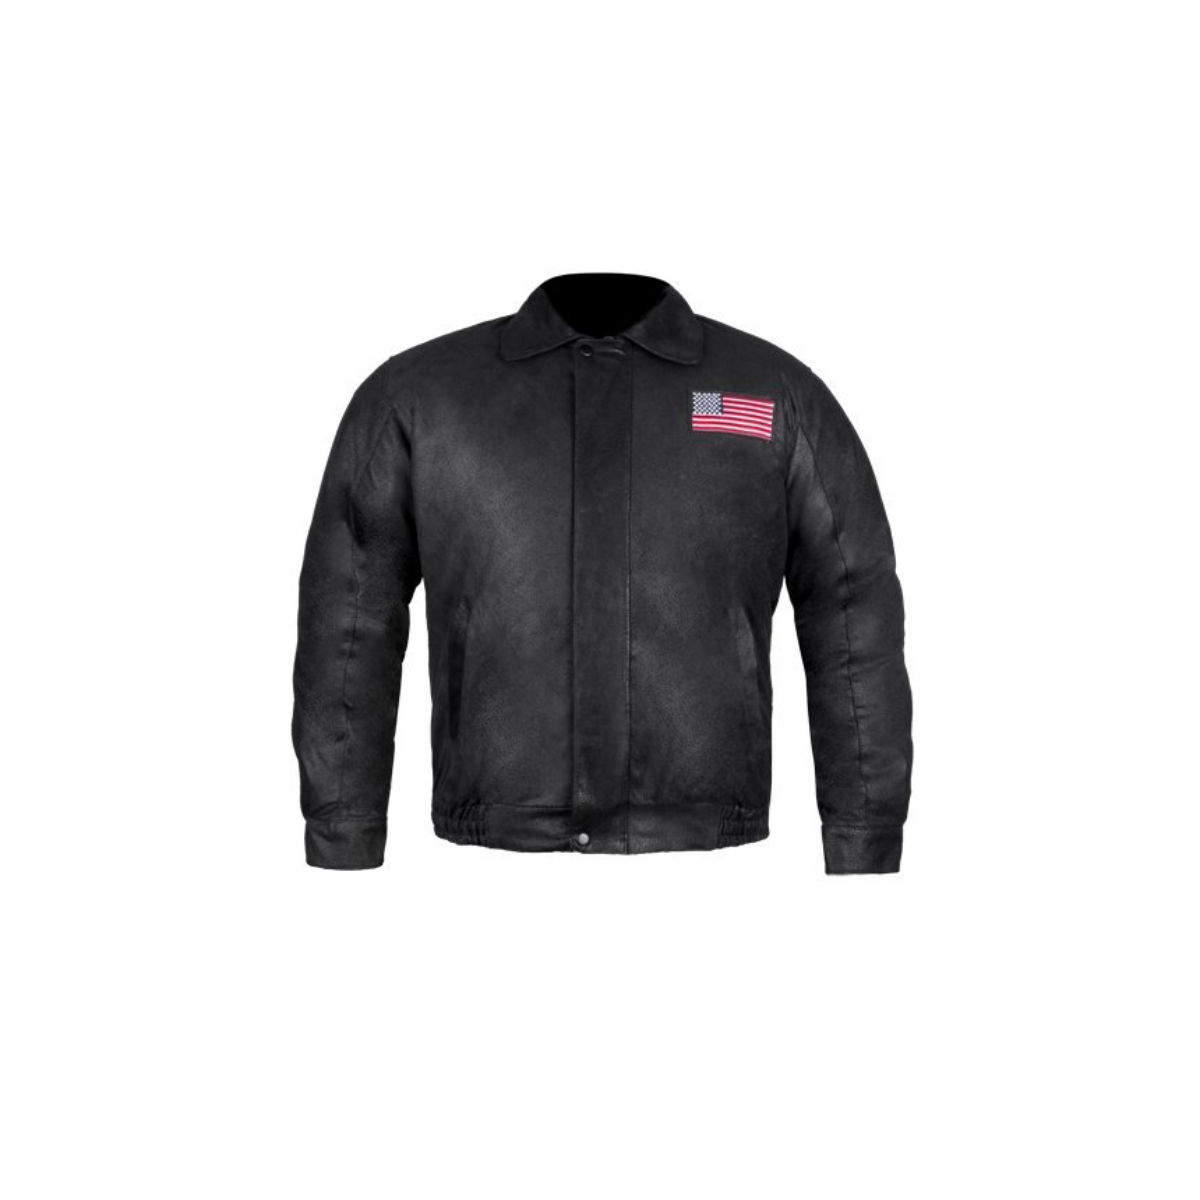 Shop for the Genuine Leather Jacket USA | Ameri Selections Inc.